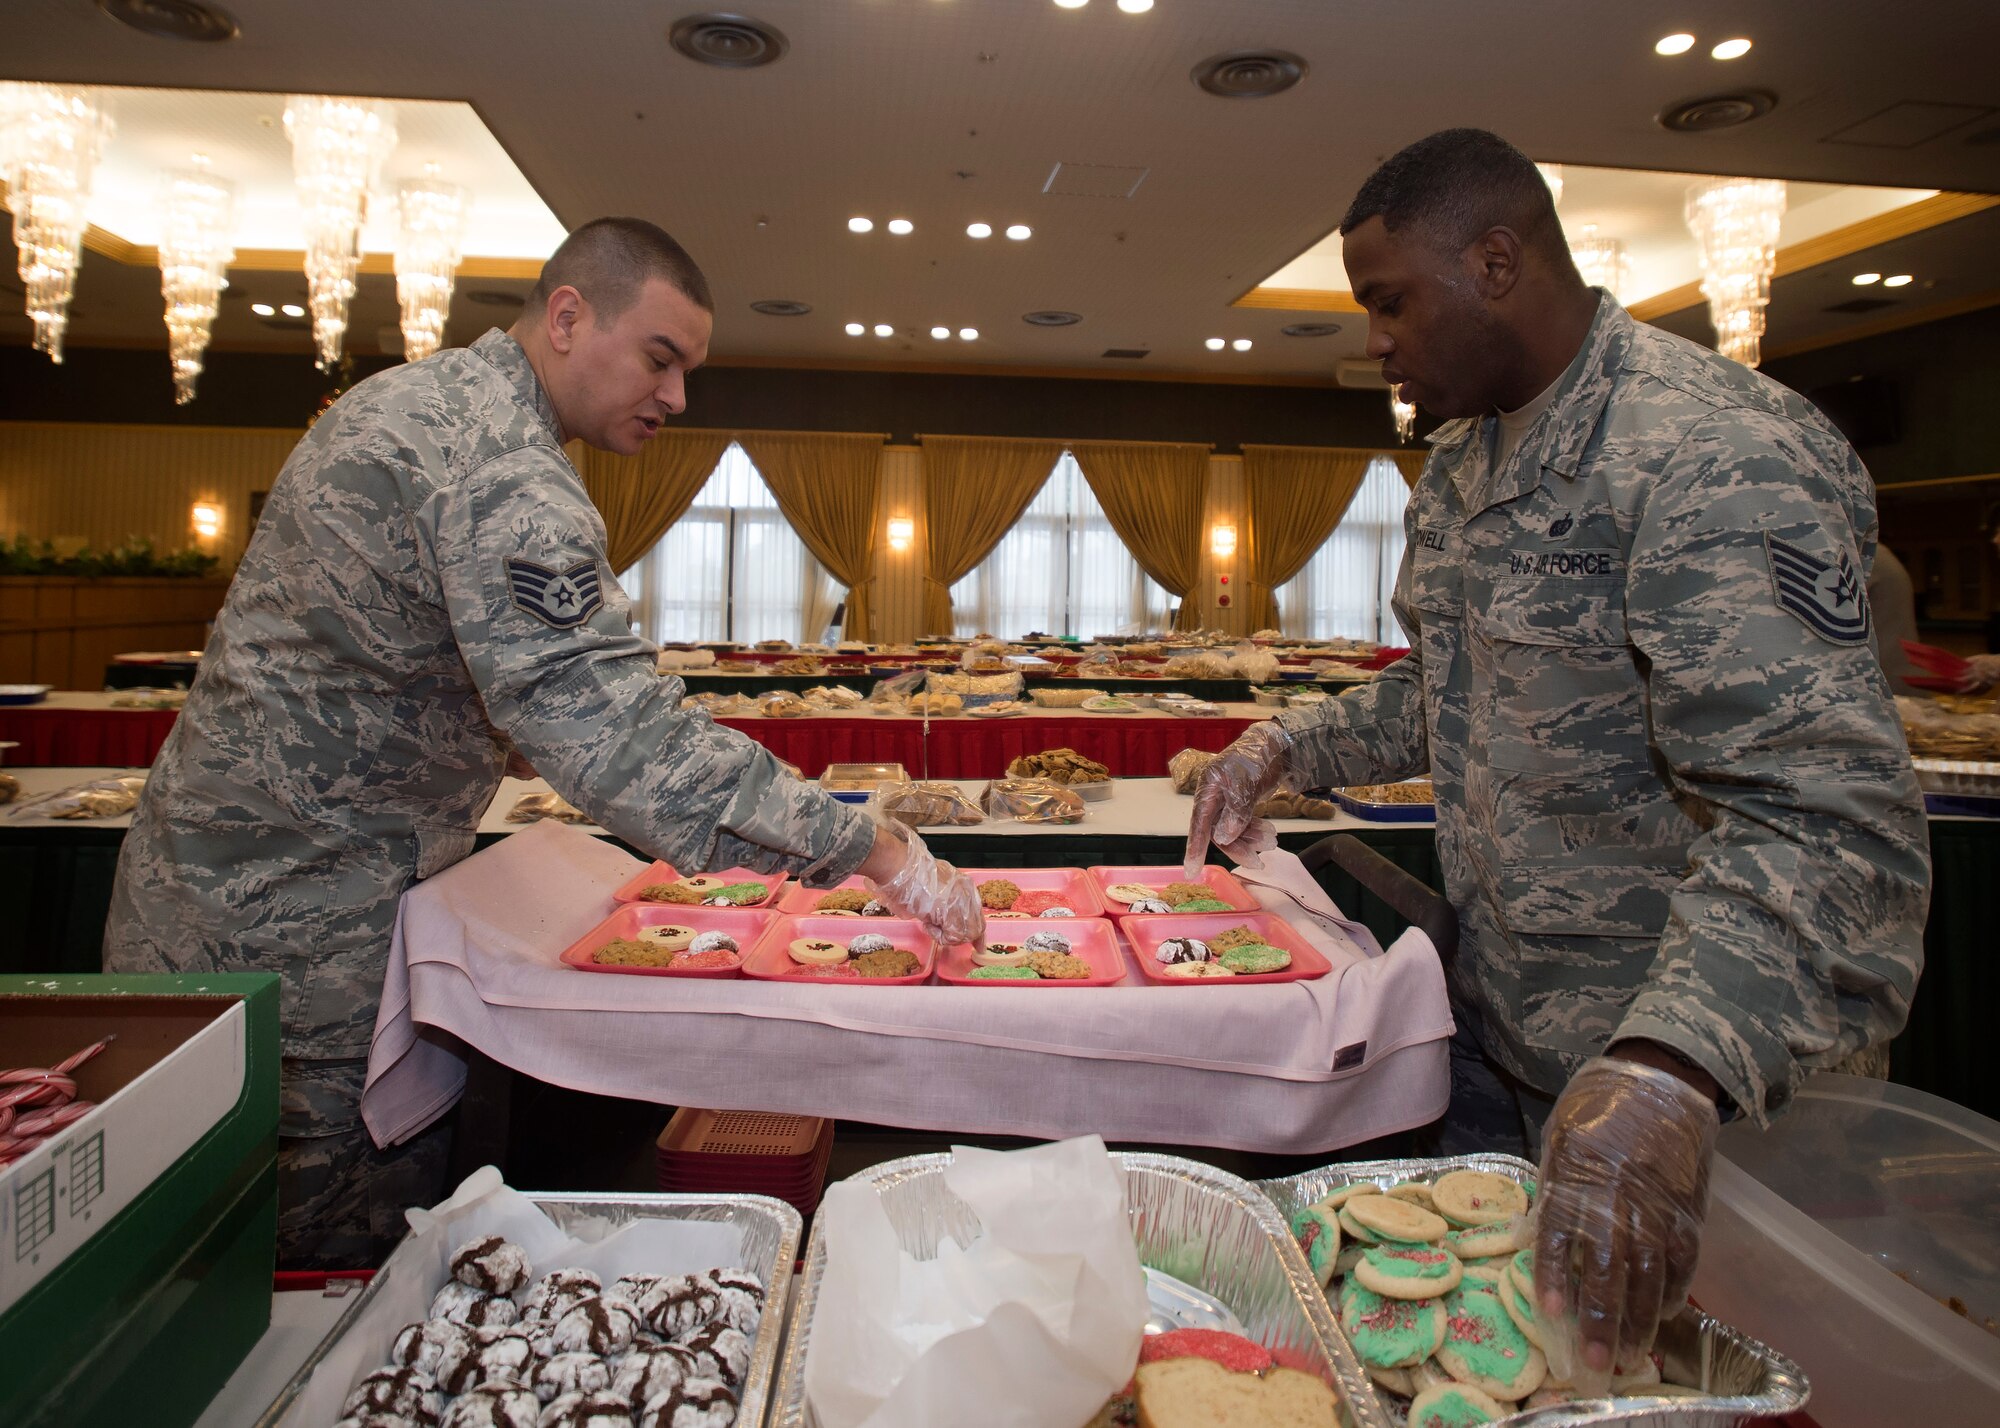 U.S. Air Force Staff Sgt. Robert Smalling, left, the 35th Medial Operations Squadron immunizations NCO in charge, and Tech. Sgt. Johnnie Powell, right, the 35th Force Support Squadron readiness and mortuary affairs NCO in charge, divide cookies during the annual Cookie Caper event at Misawa Air Base, Japan, Dec. 7, 2016. Volunteers gave more than 14,400 home-baked cookies to the event, while others donated dough to be cooked. (U.S. Air Force photo by Senior Airman Deana Heitzman)